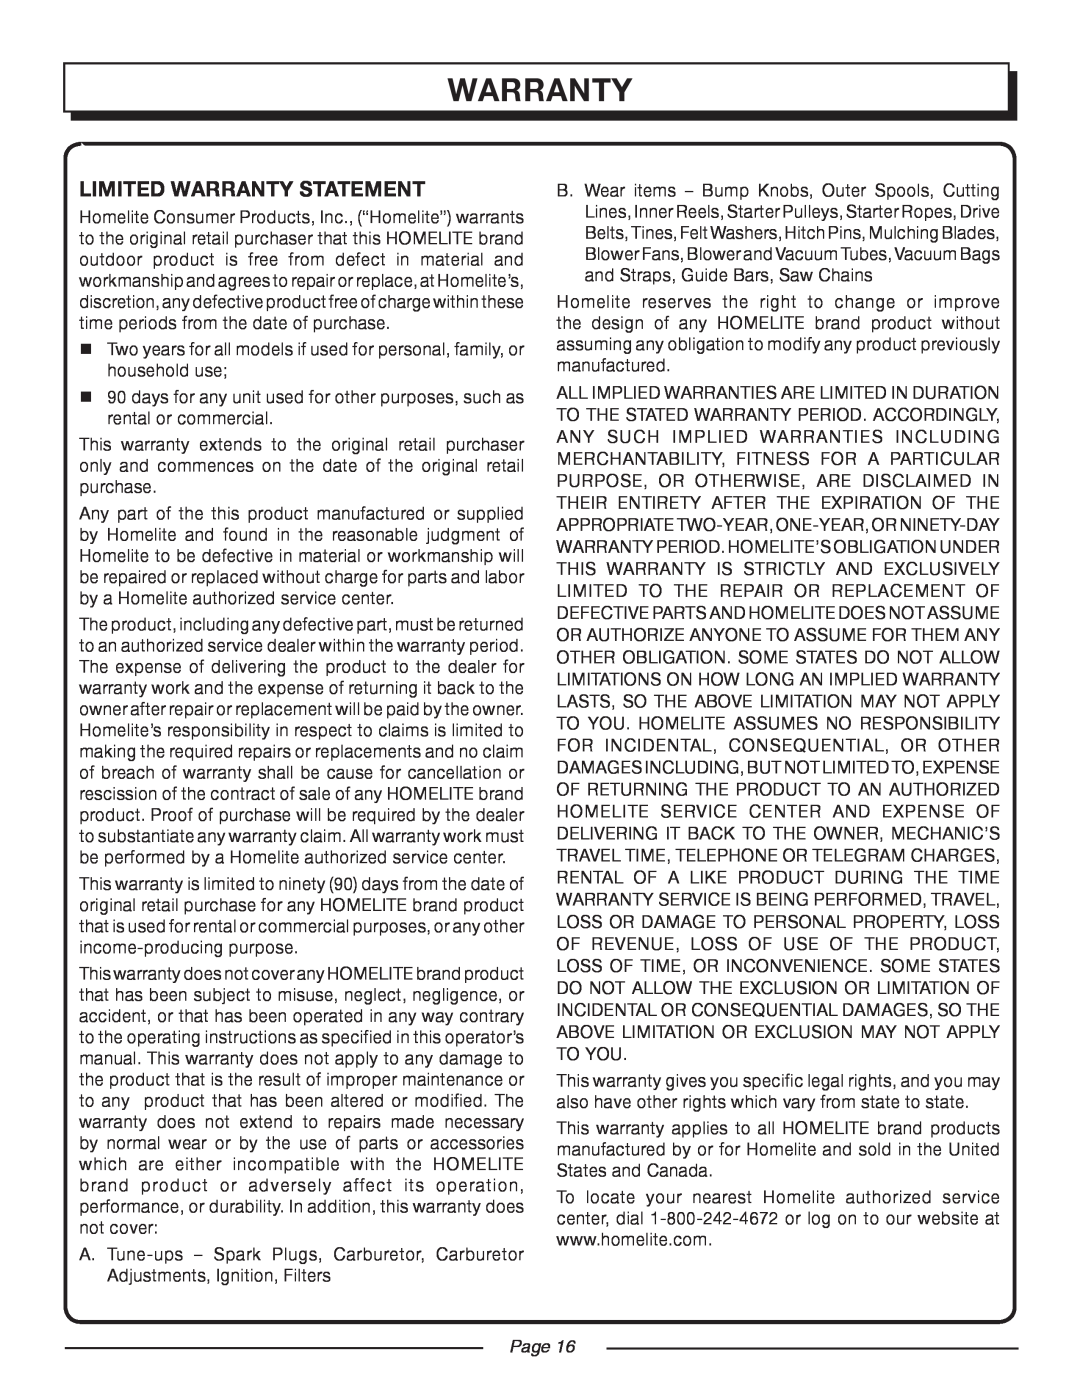 Homelite UT44170 manual Limited Warranty Statement, Page 